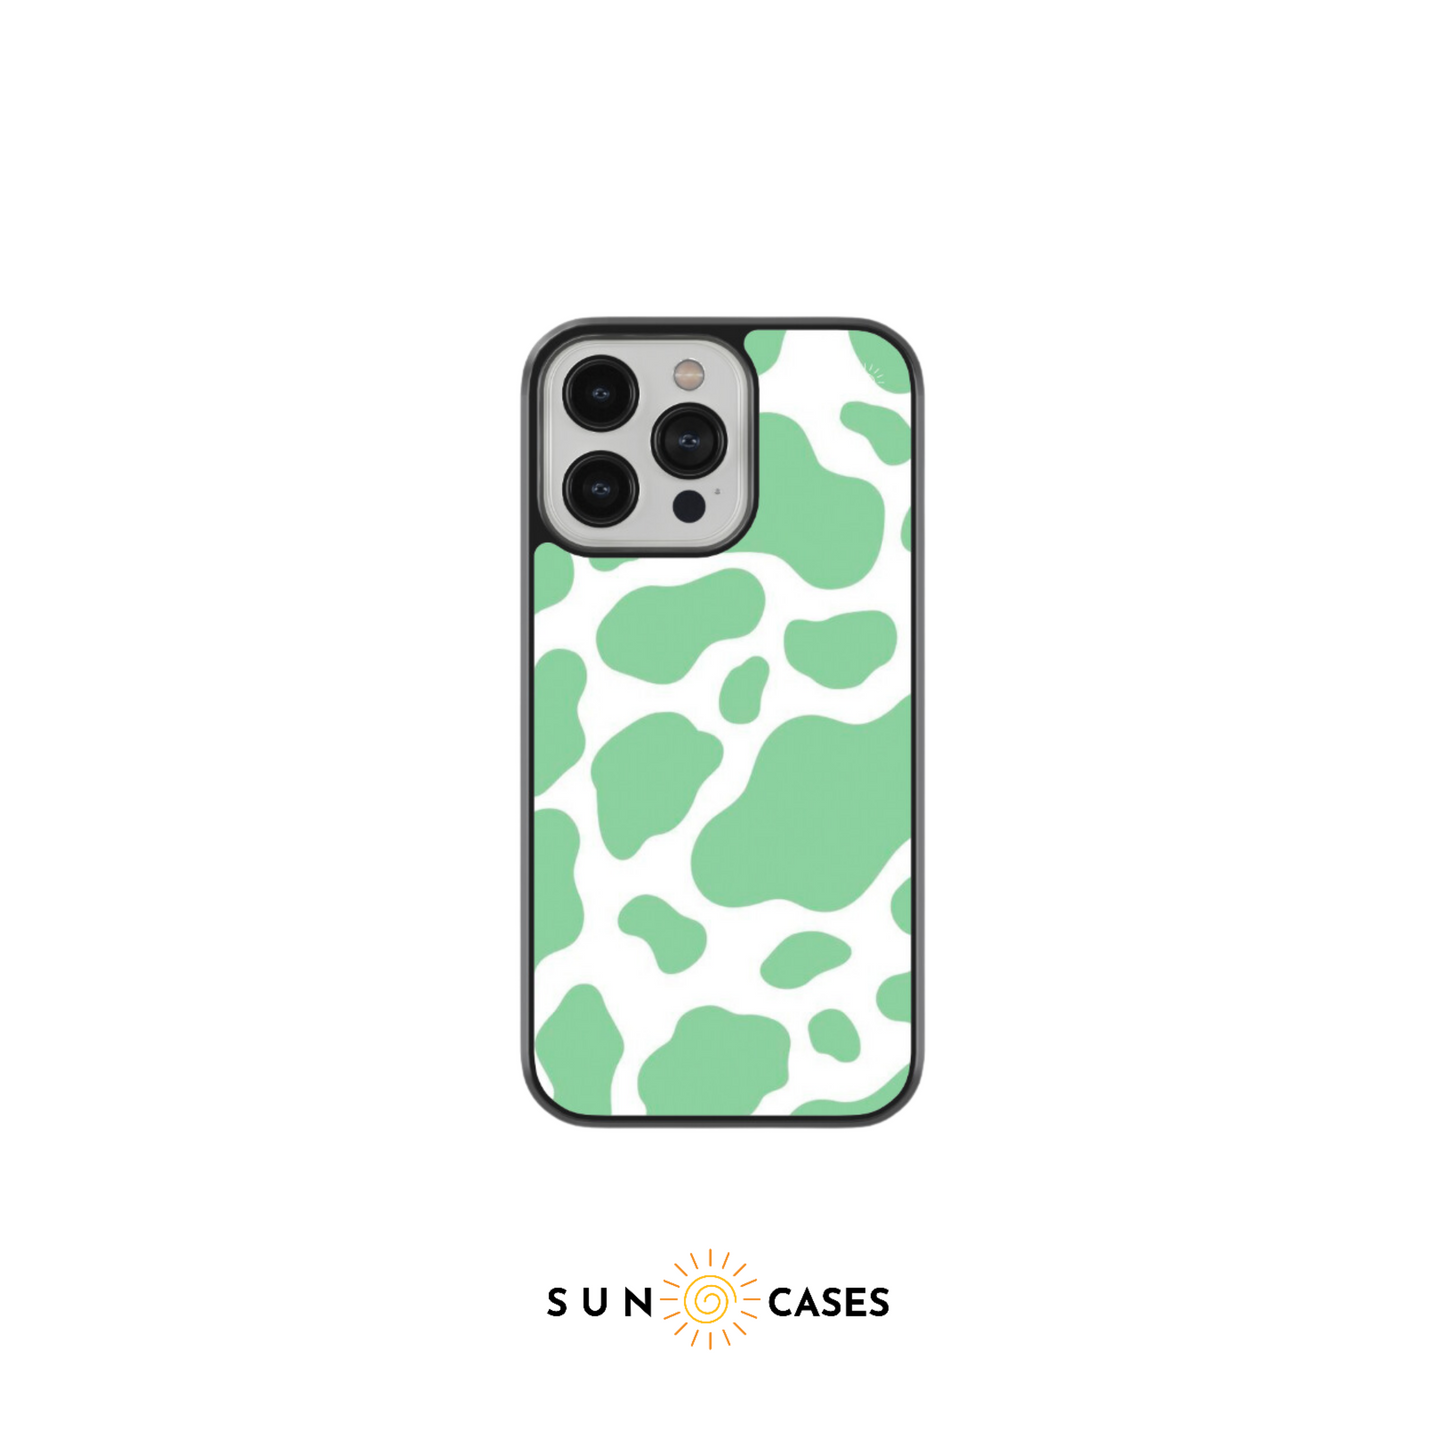 The Cow Case - Green Cow